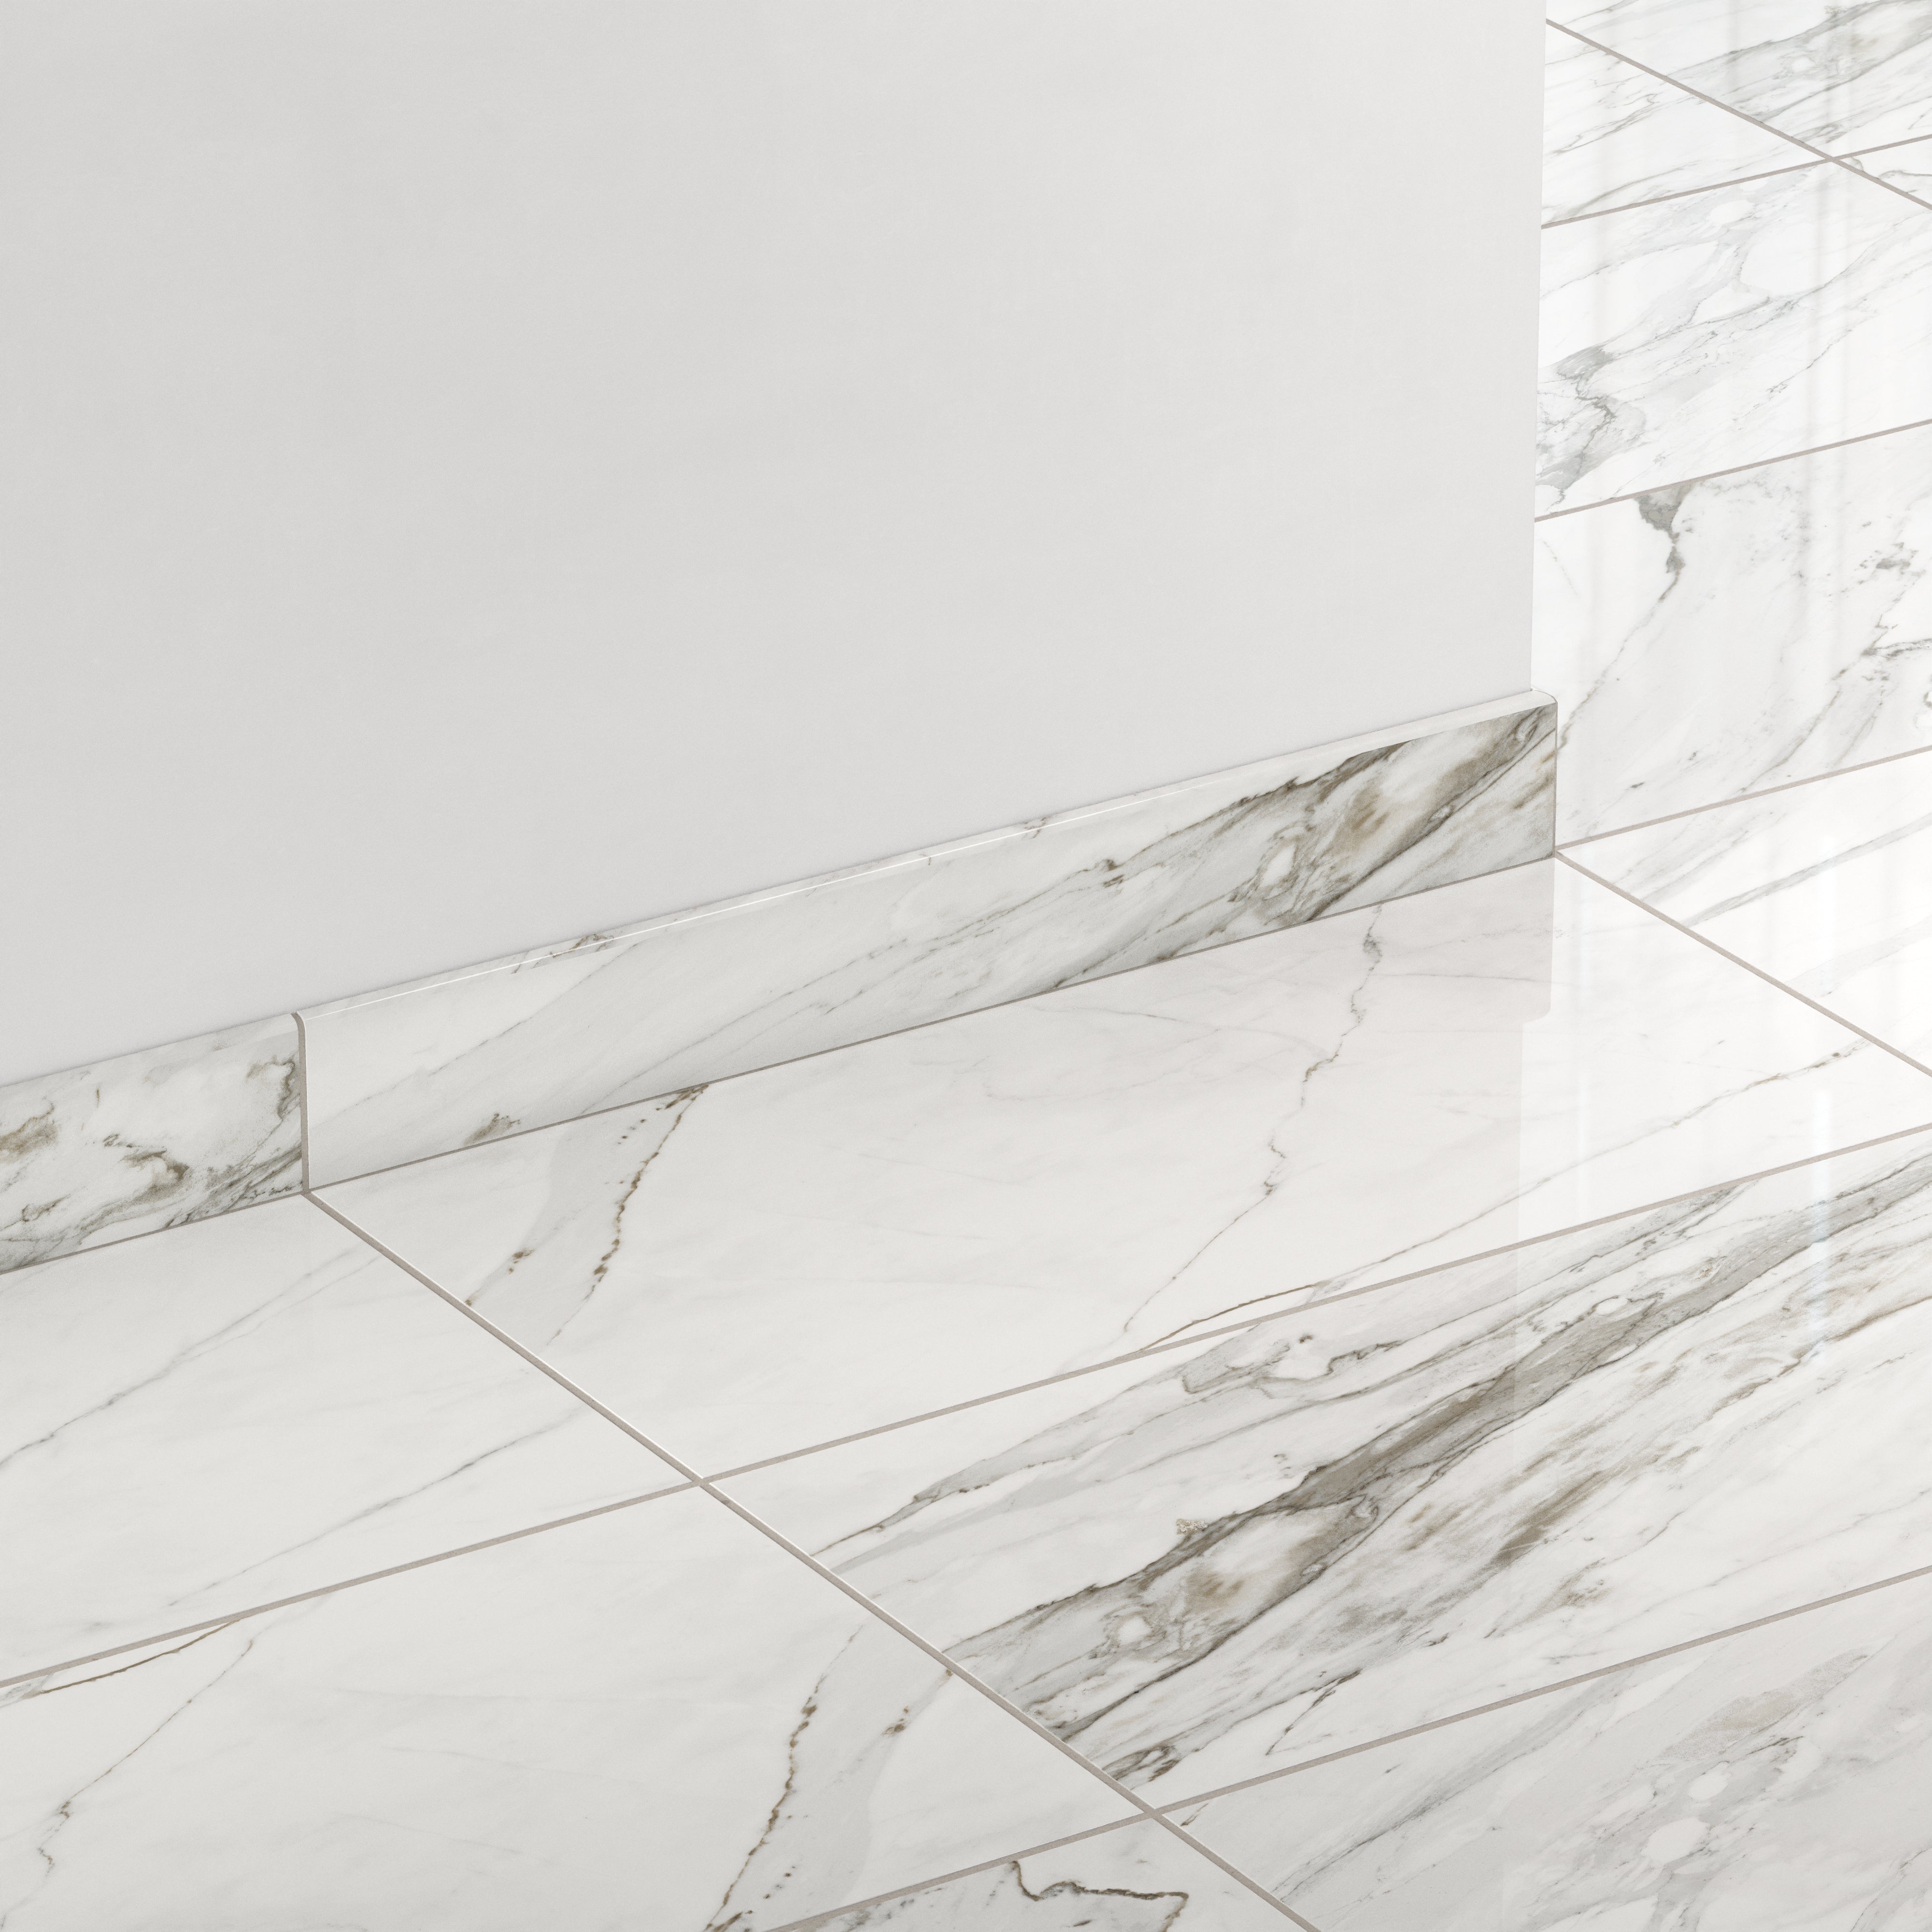 Chantel 3x24 Polished Porcelain Bullnose Tile in Apuano